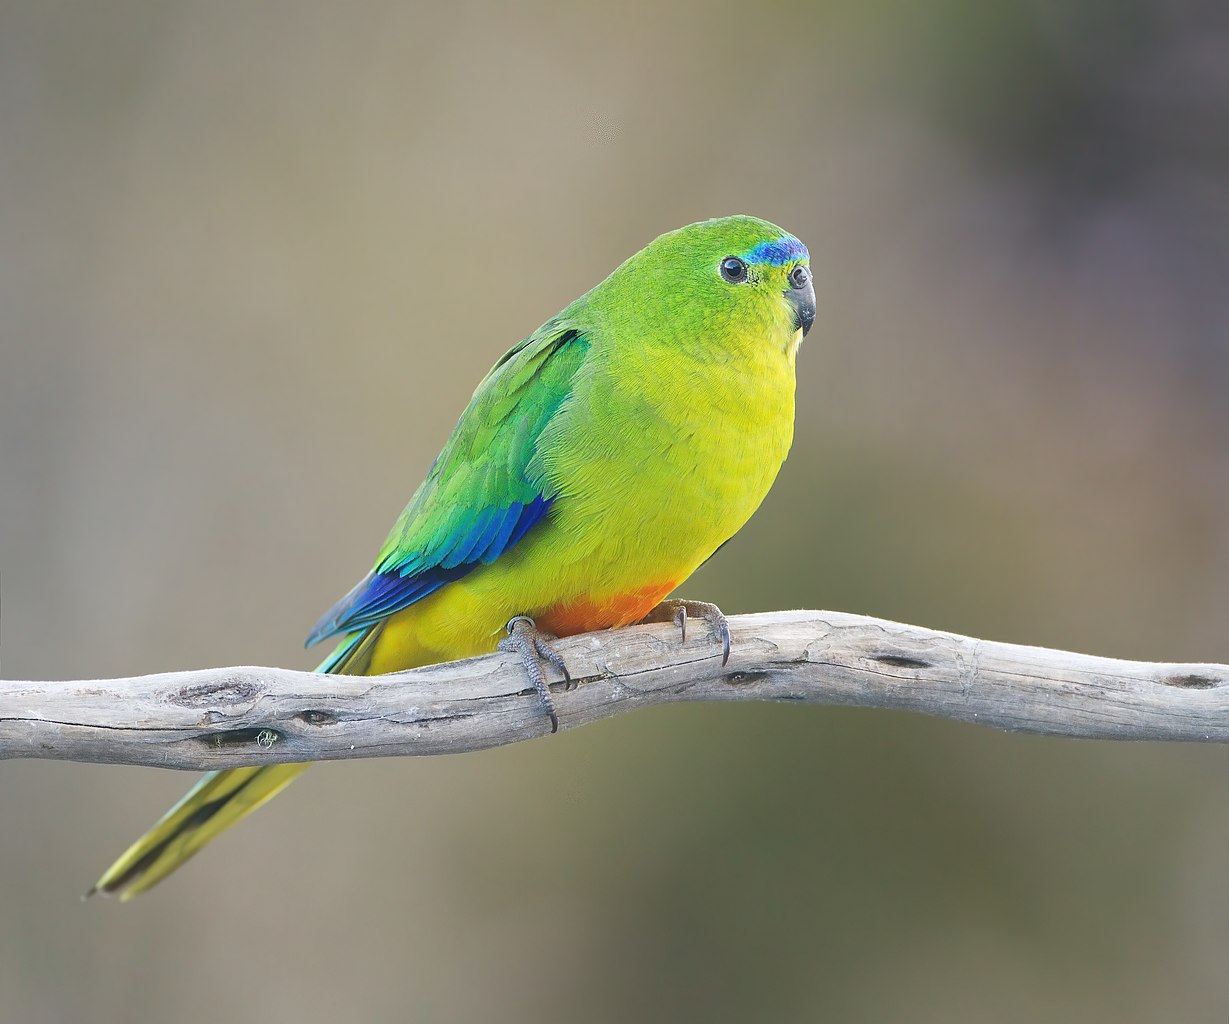 an Orange-bellied Parrot perched on a branch